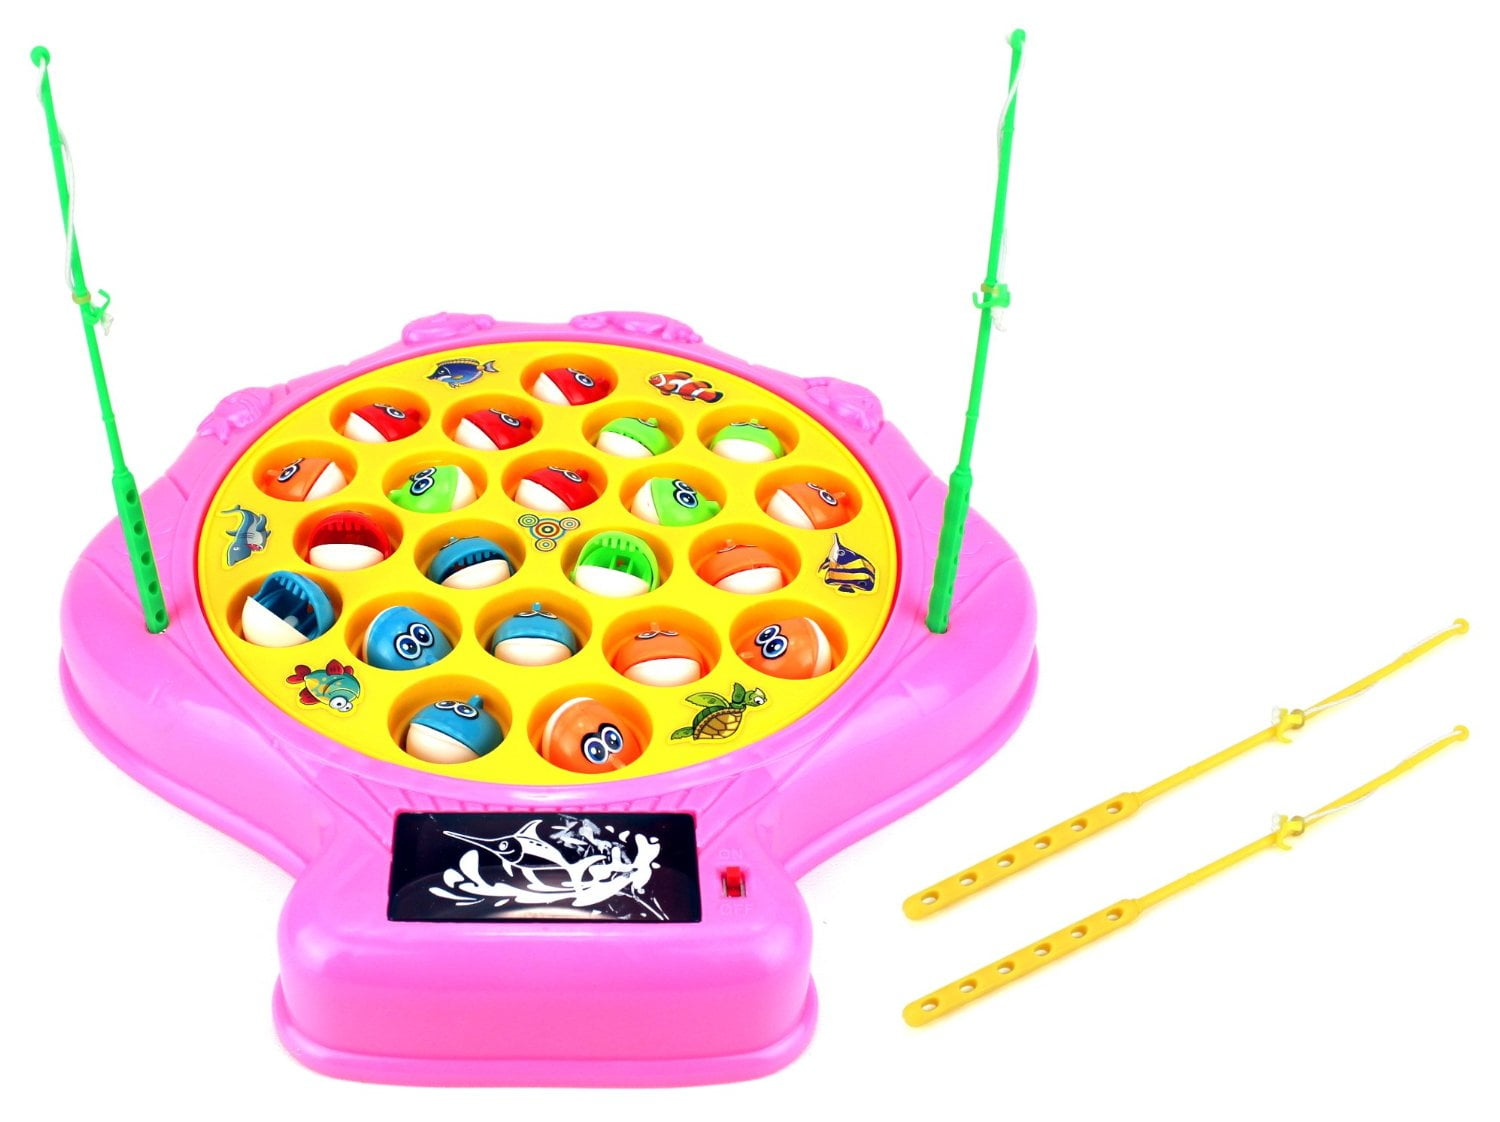 Deep Sea Shell Fishing Game for Children Battery Operated Rotating